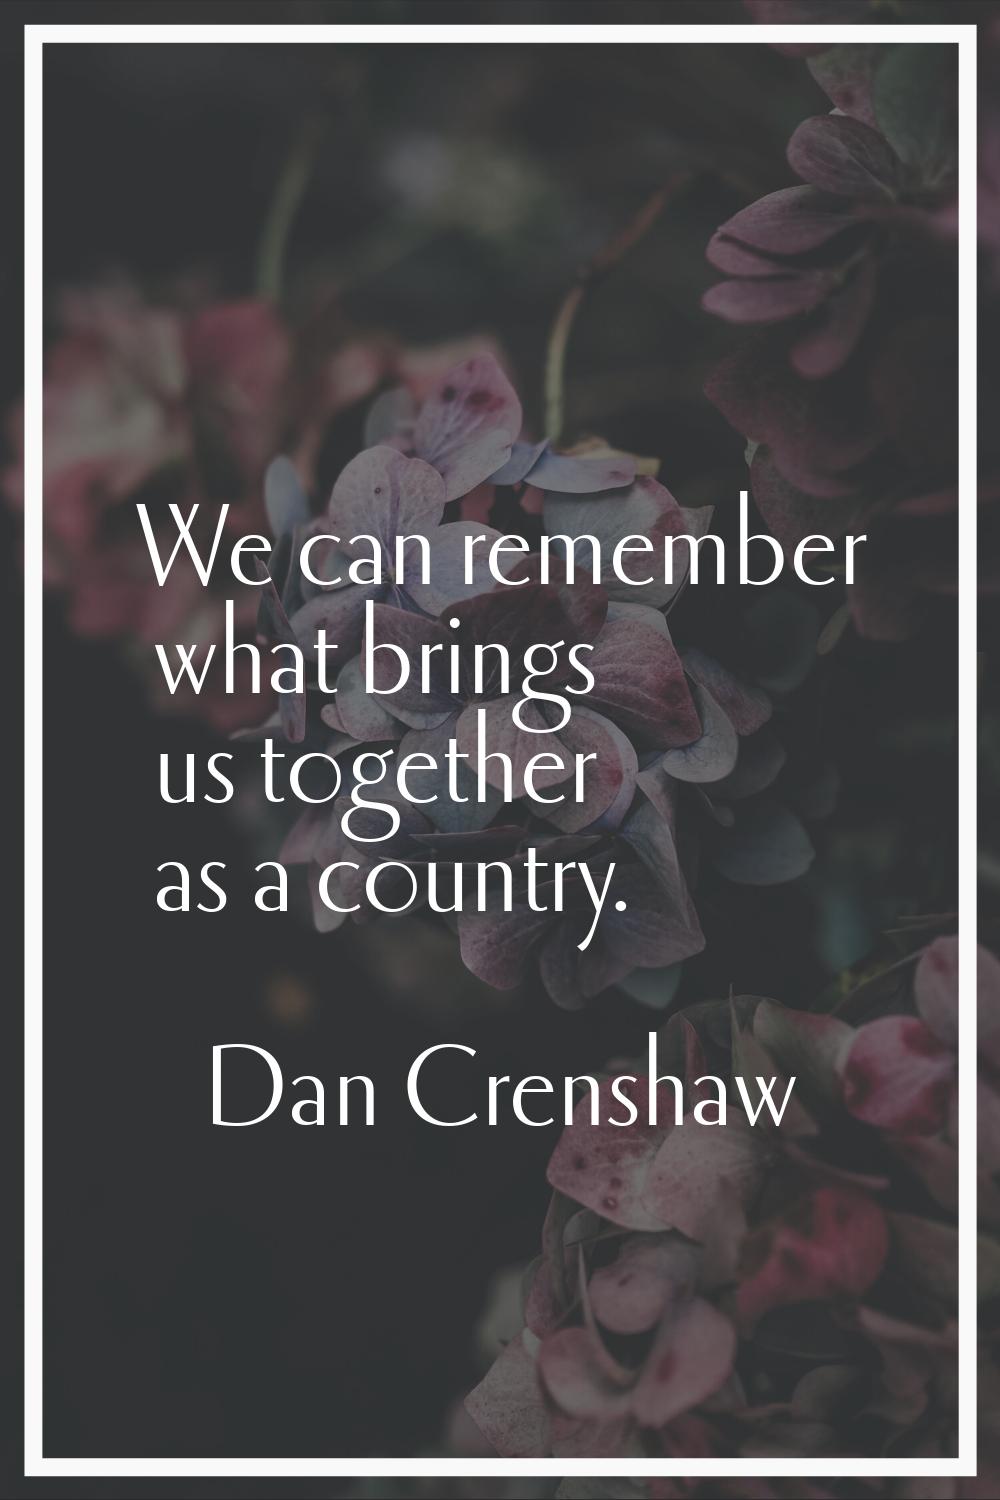 We can remember what brings us together as a country.